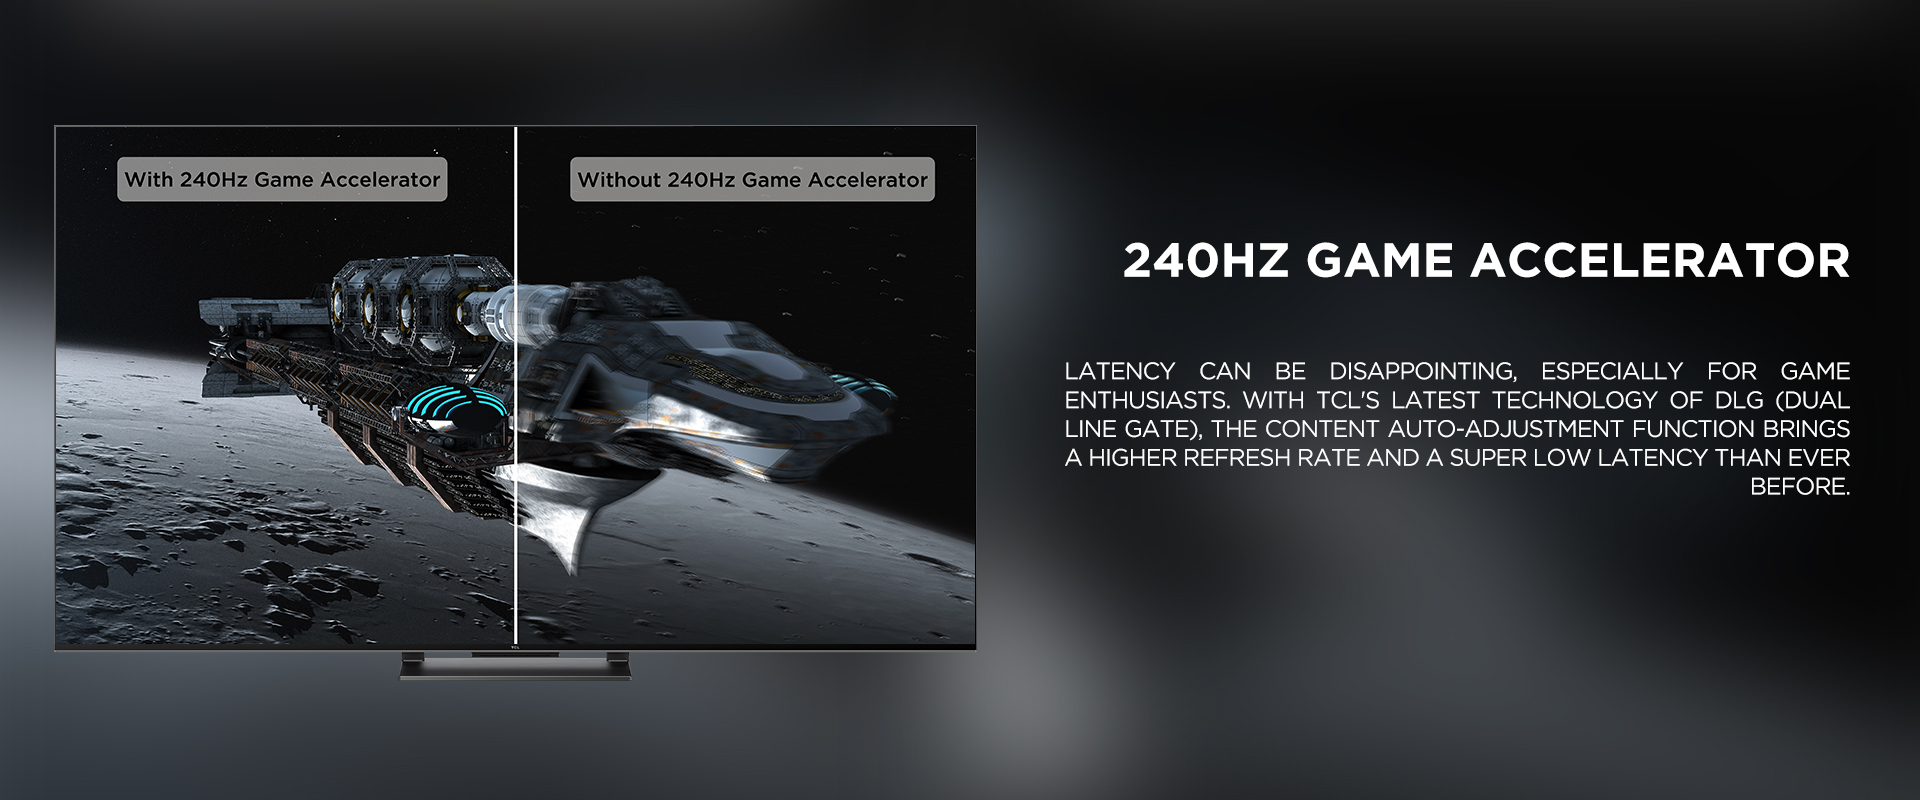 240Hz Game Accelerator - Latency can be disappointing, especially for game enthusiasts. With TCL's latest technology of DLG (Dual Line Gate), the content auto-adjustment function brings a higher refresh rate and a super low latency than ever before. 

